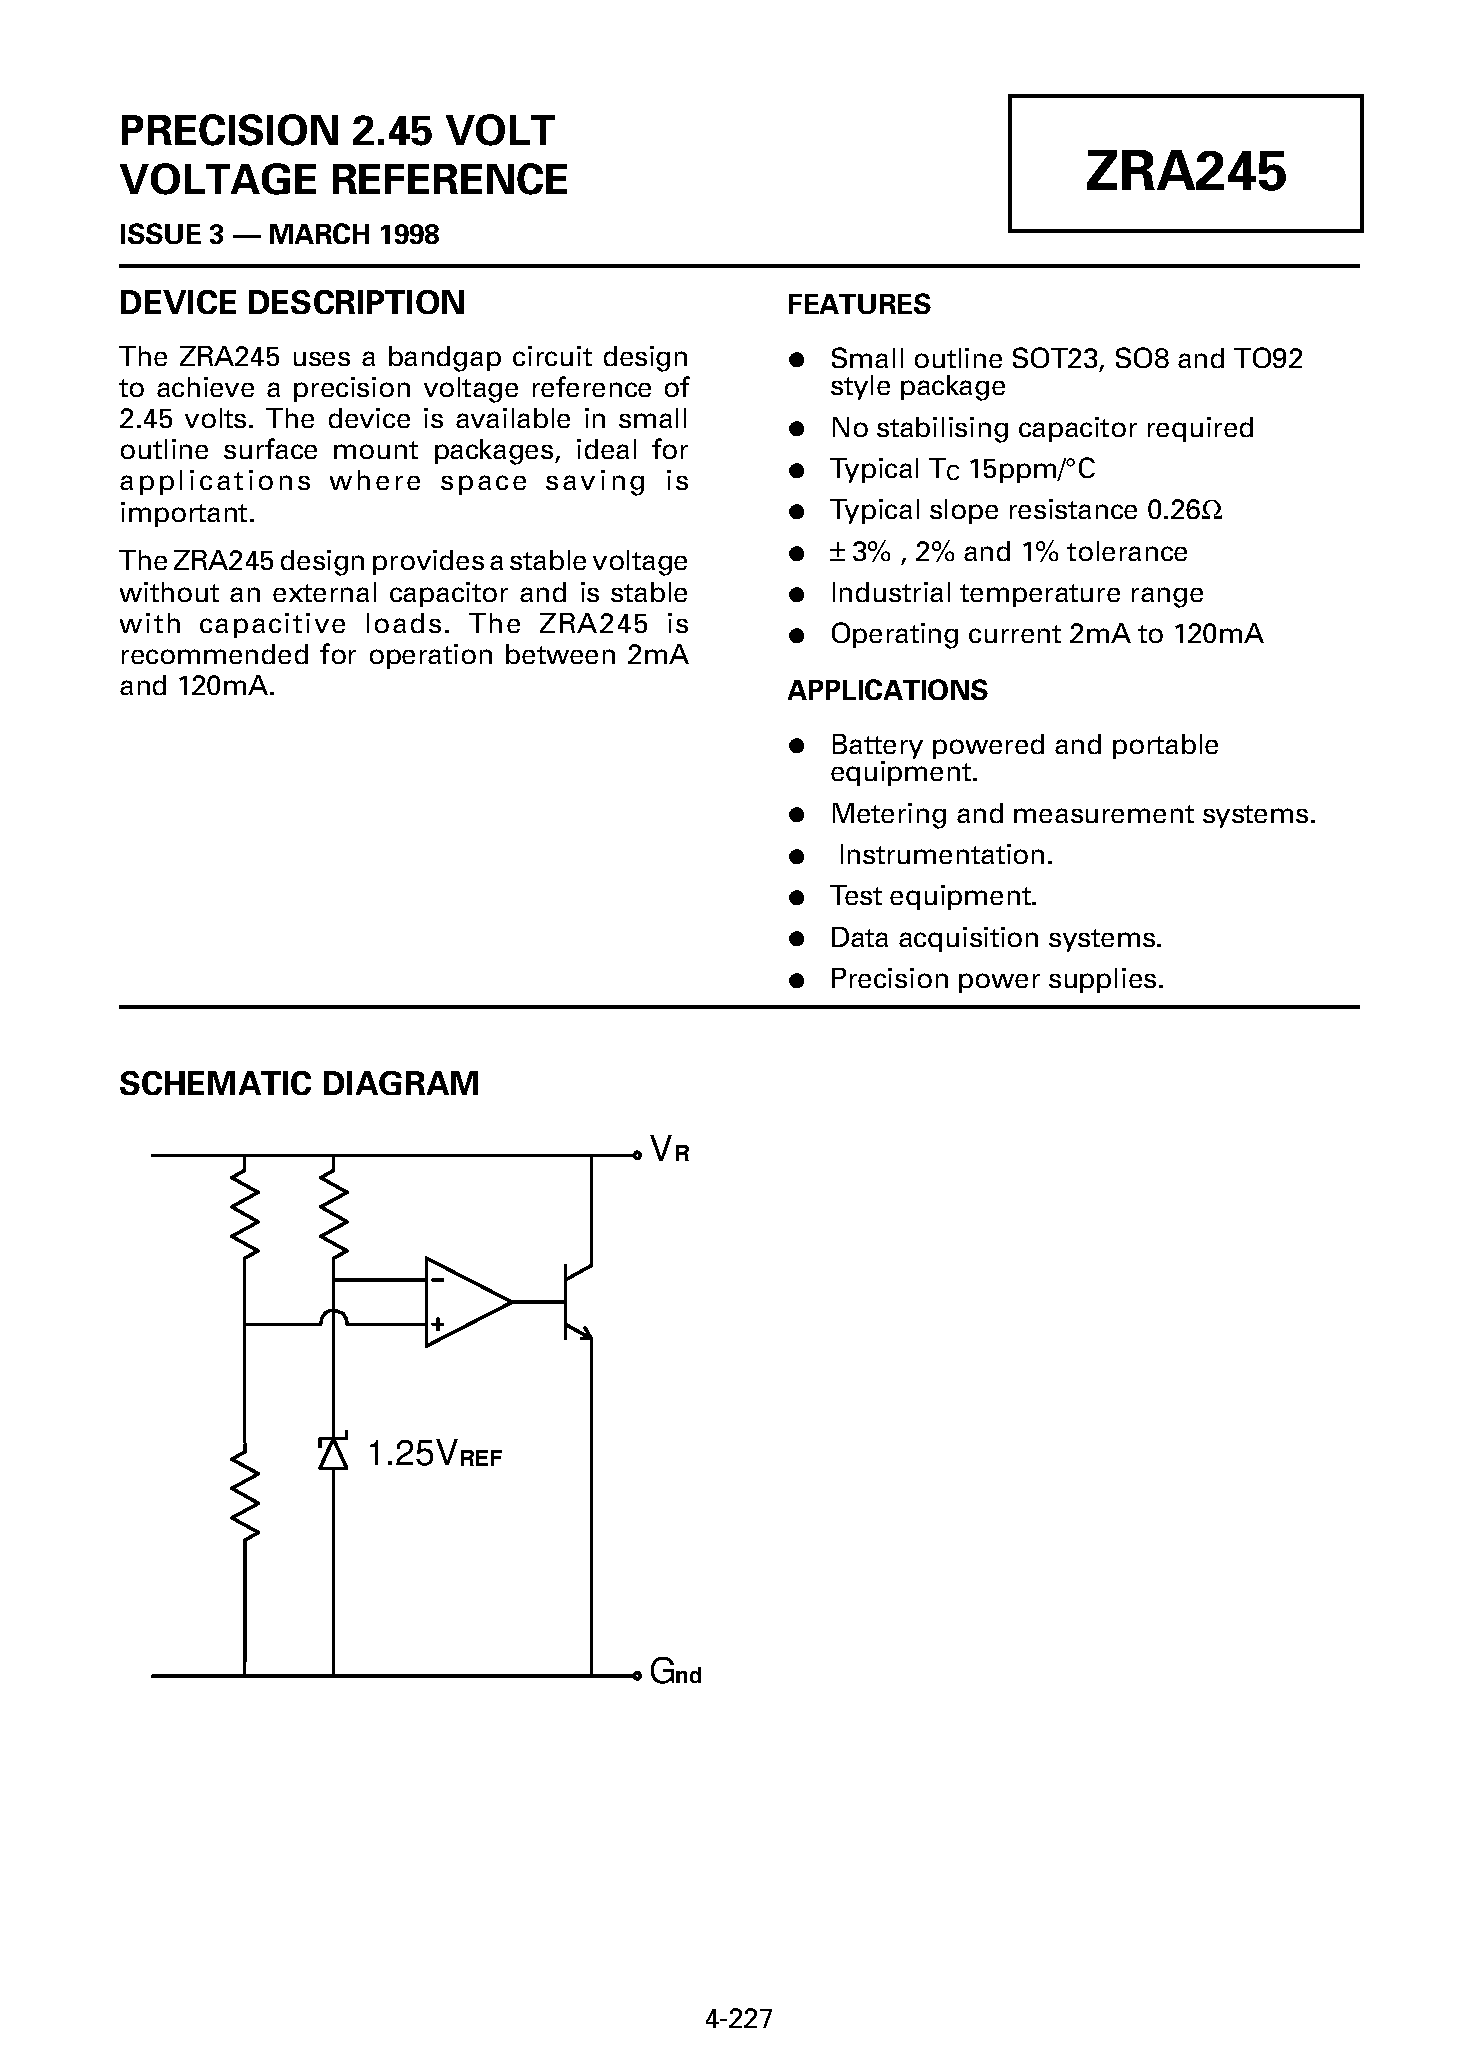 Datasheet ZRA245N802 - PRECISION 2.45 VOLT VOLTAGE REFERENCE page 1